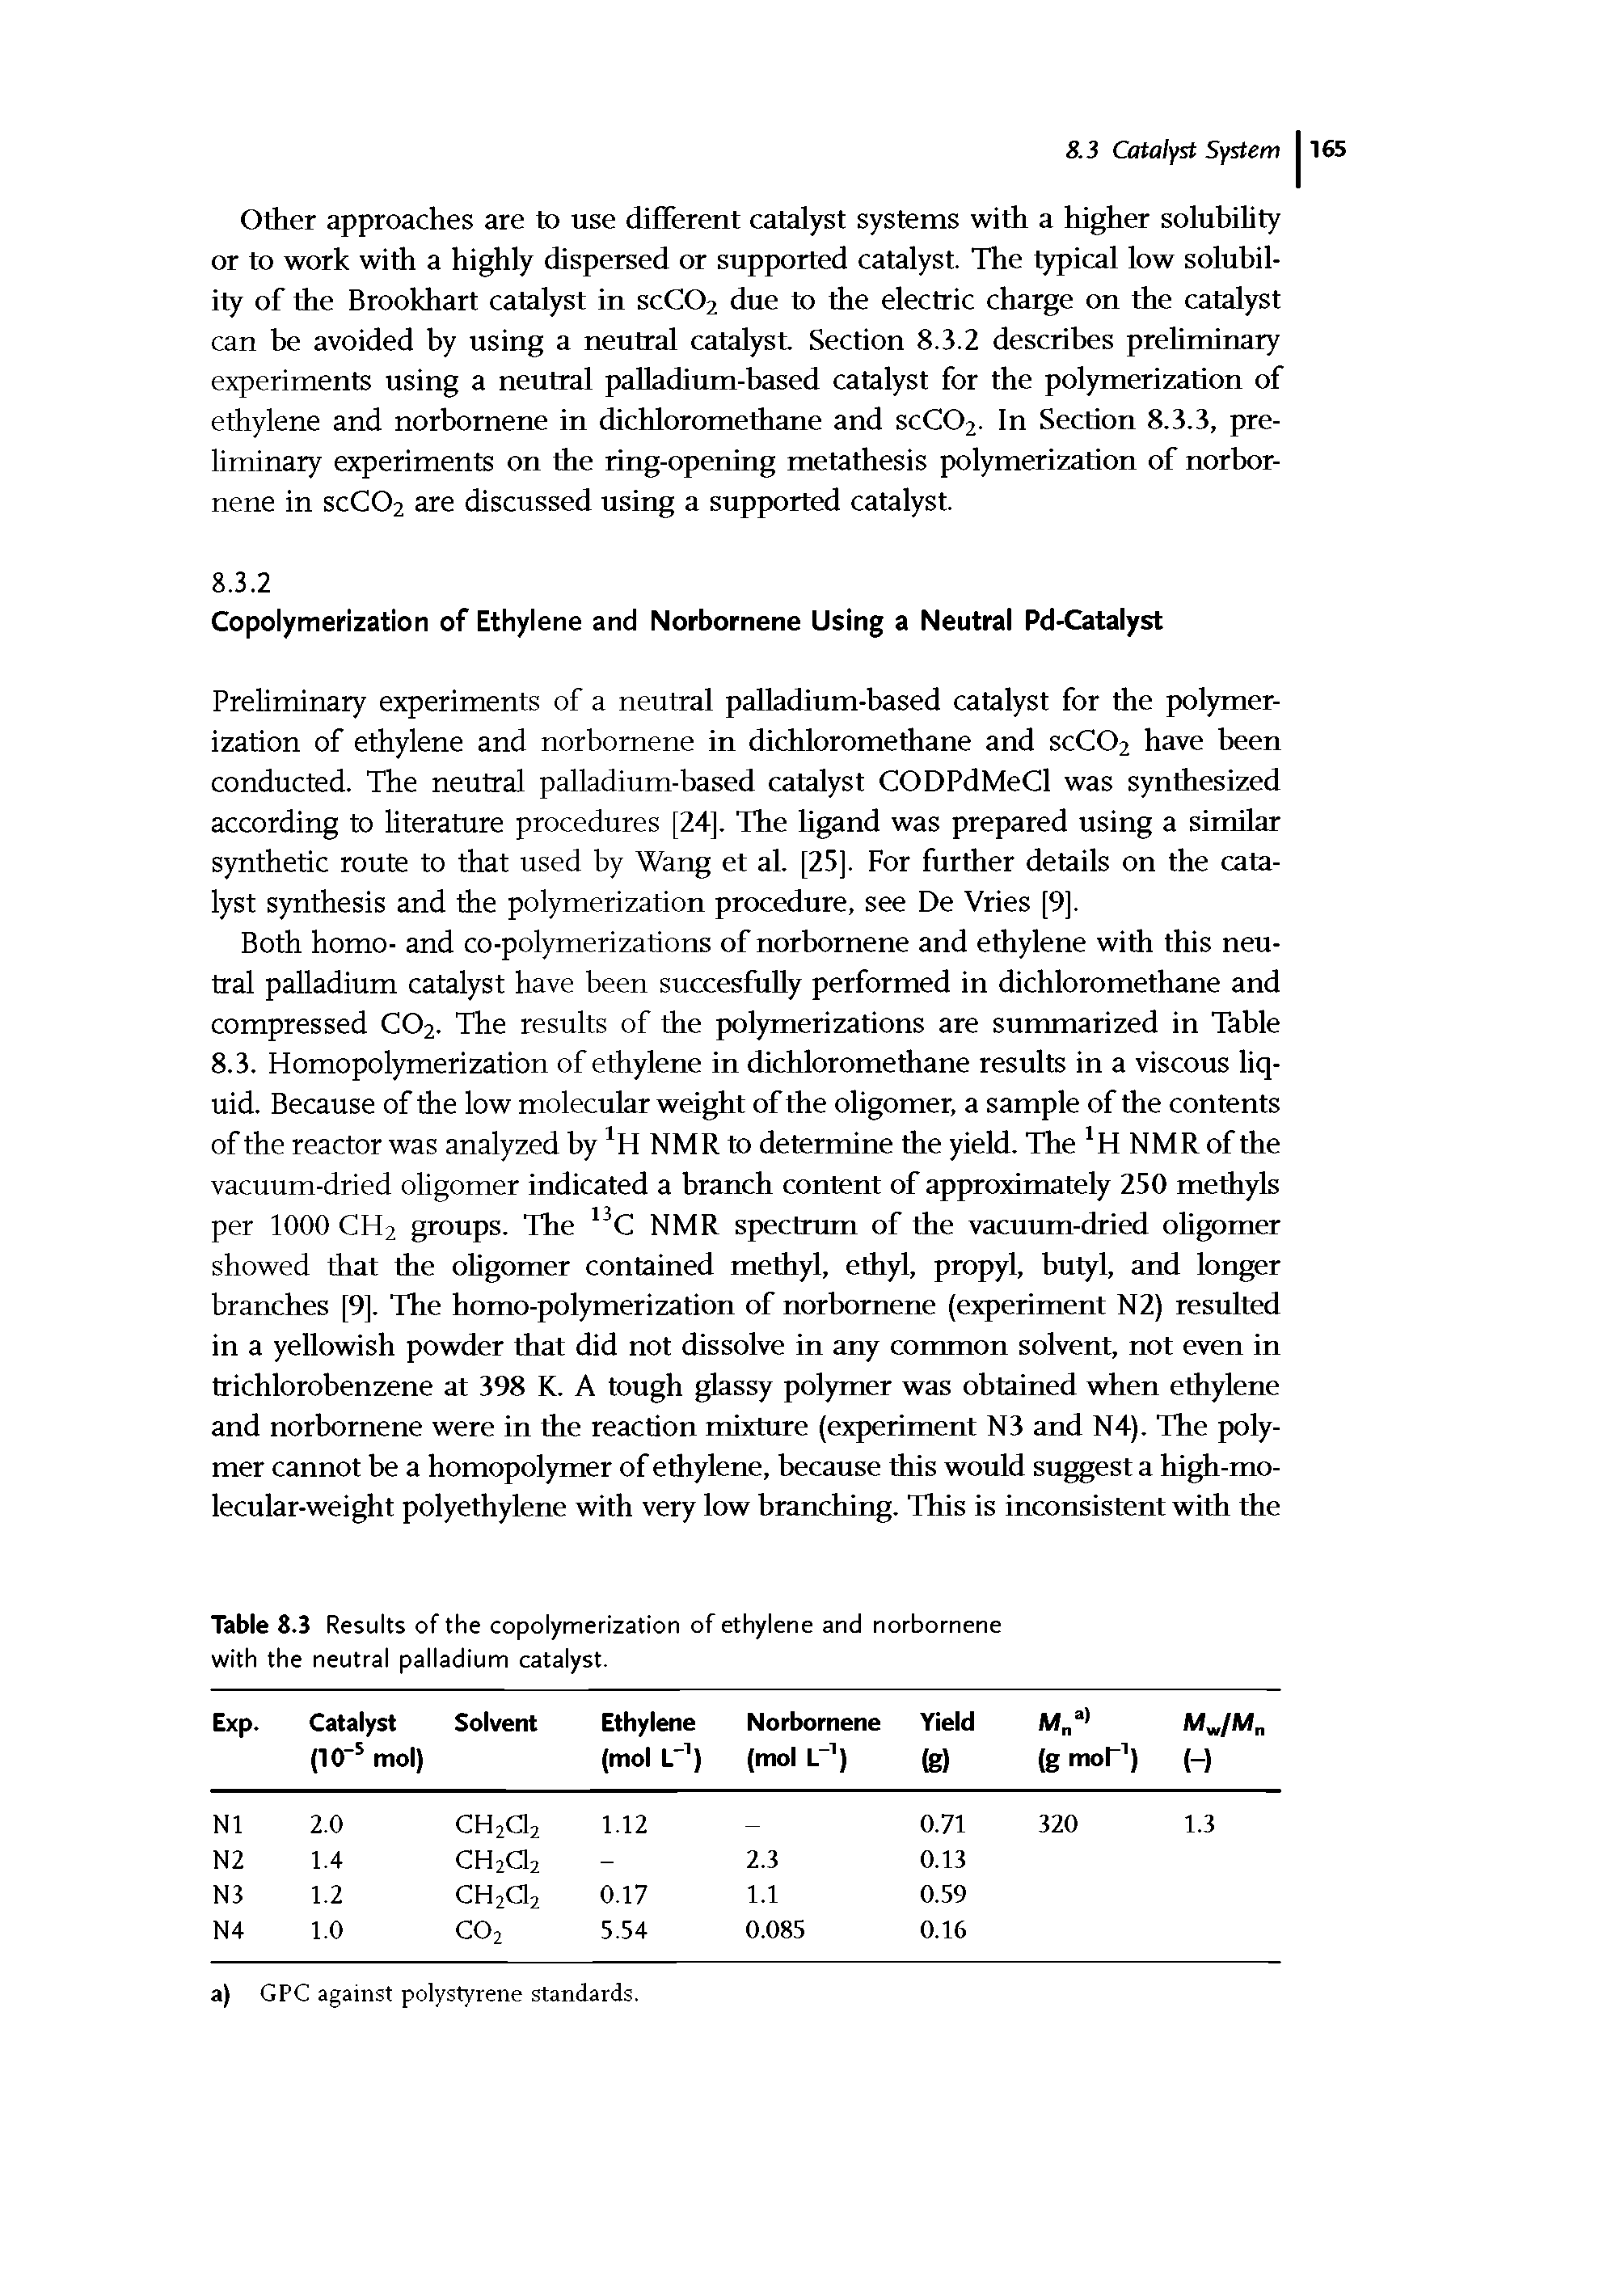 Table 8.3 Results of the copolymerization of ethylene and norbornene with the neutral palladium catalyst.